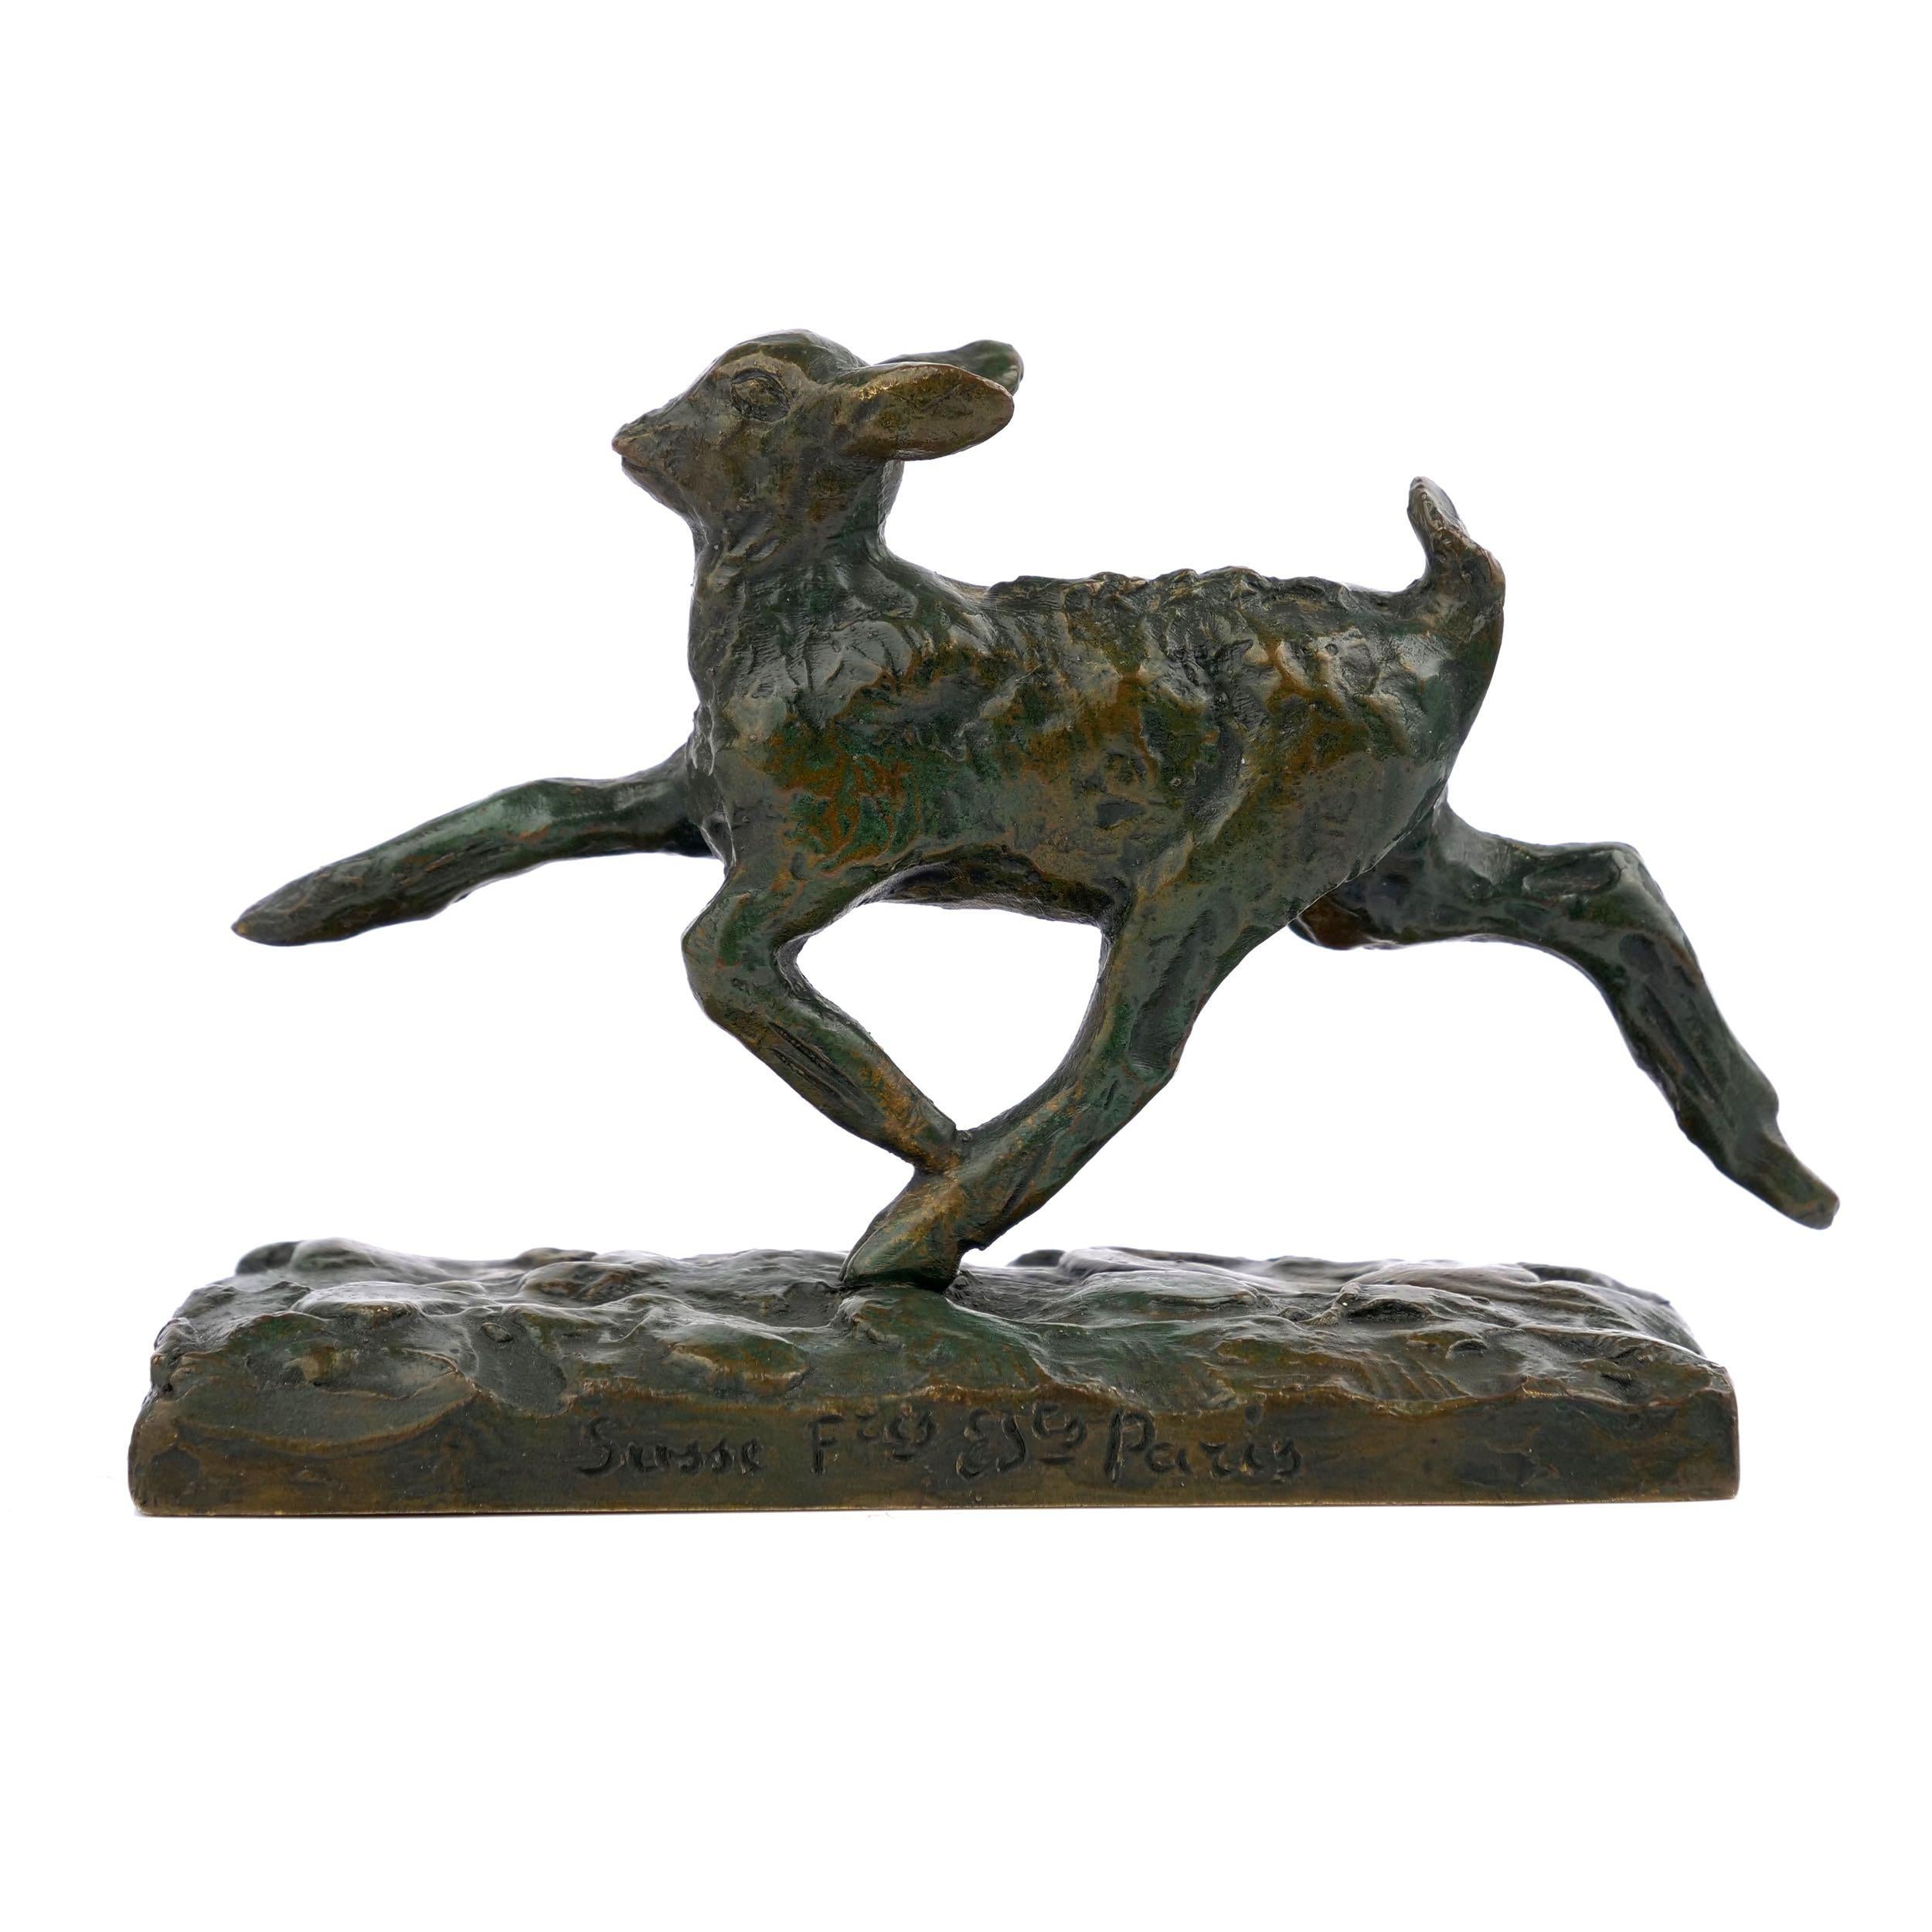 A rare and fine work by Ary Bitter and cast by Susse Freres in Paris, this small Modernism sculpture captures a young goat in mid-stride as it runs through a field. The work has an overall waxy and silky smooth surface from the lost-wax casting